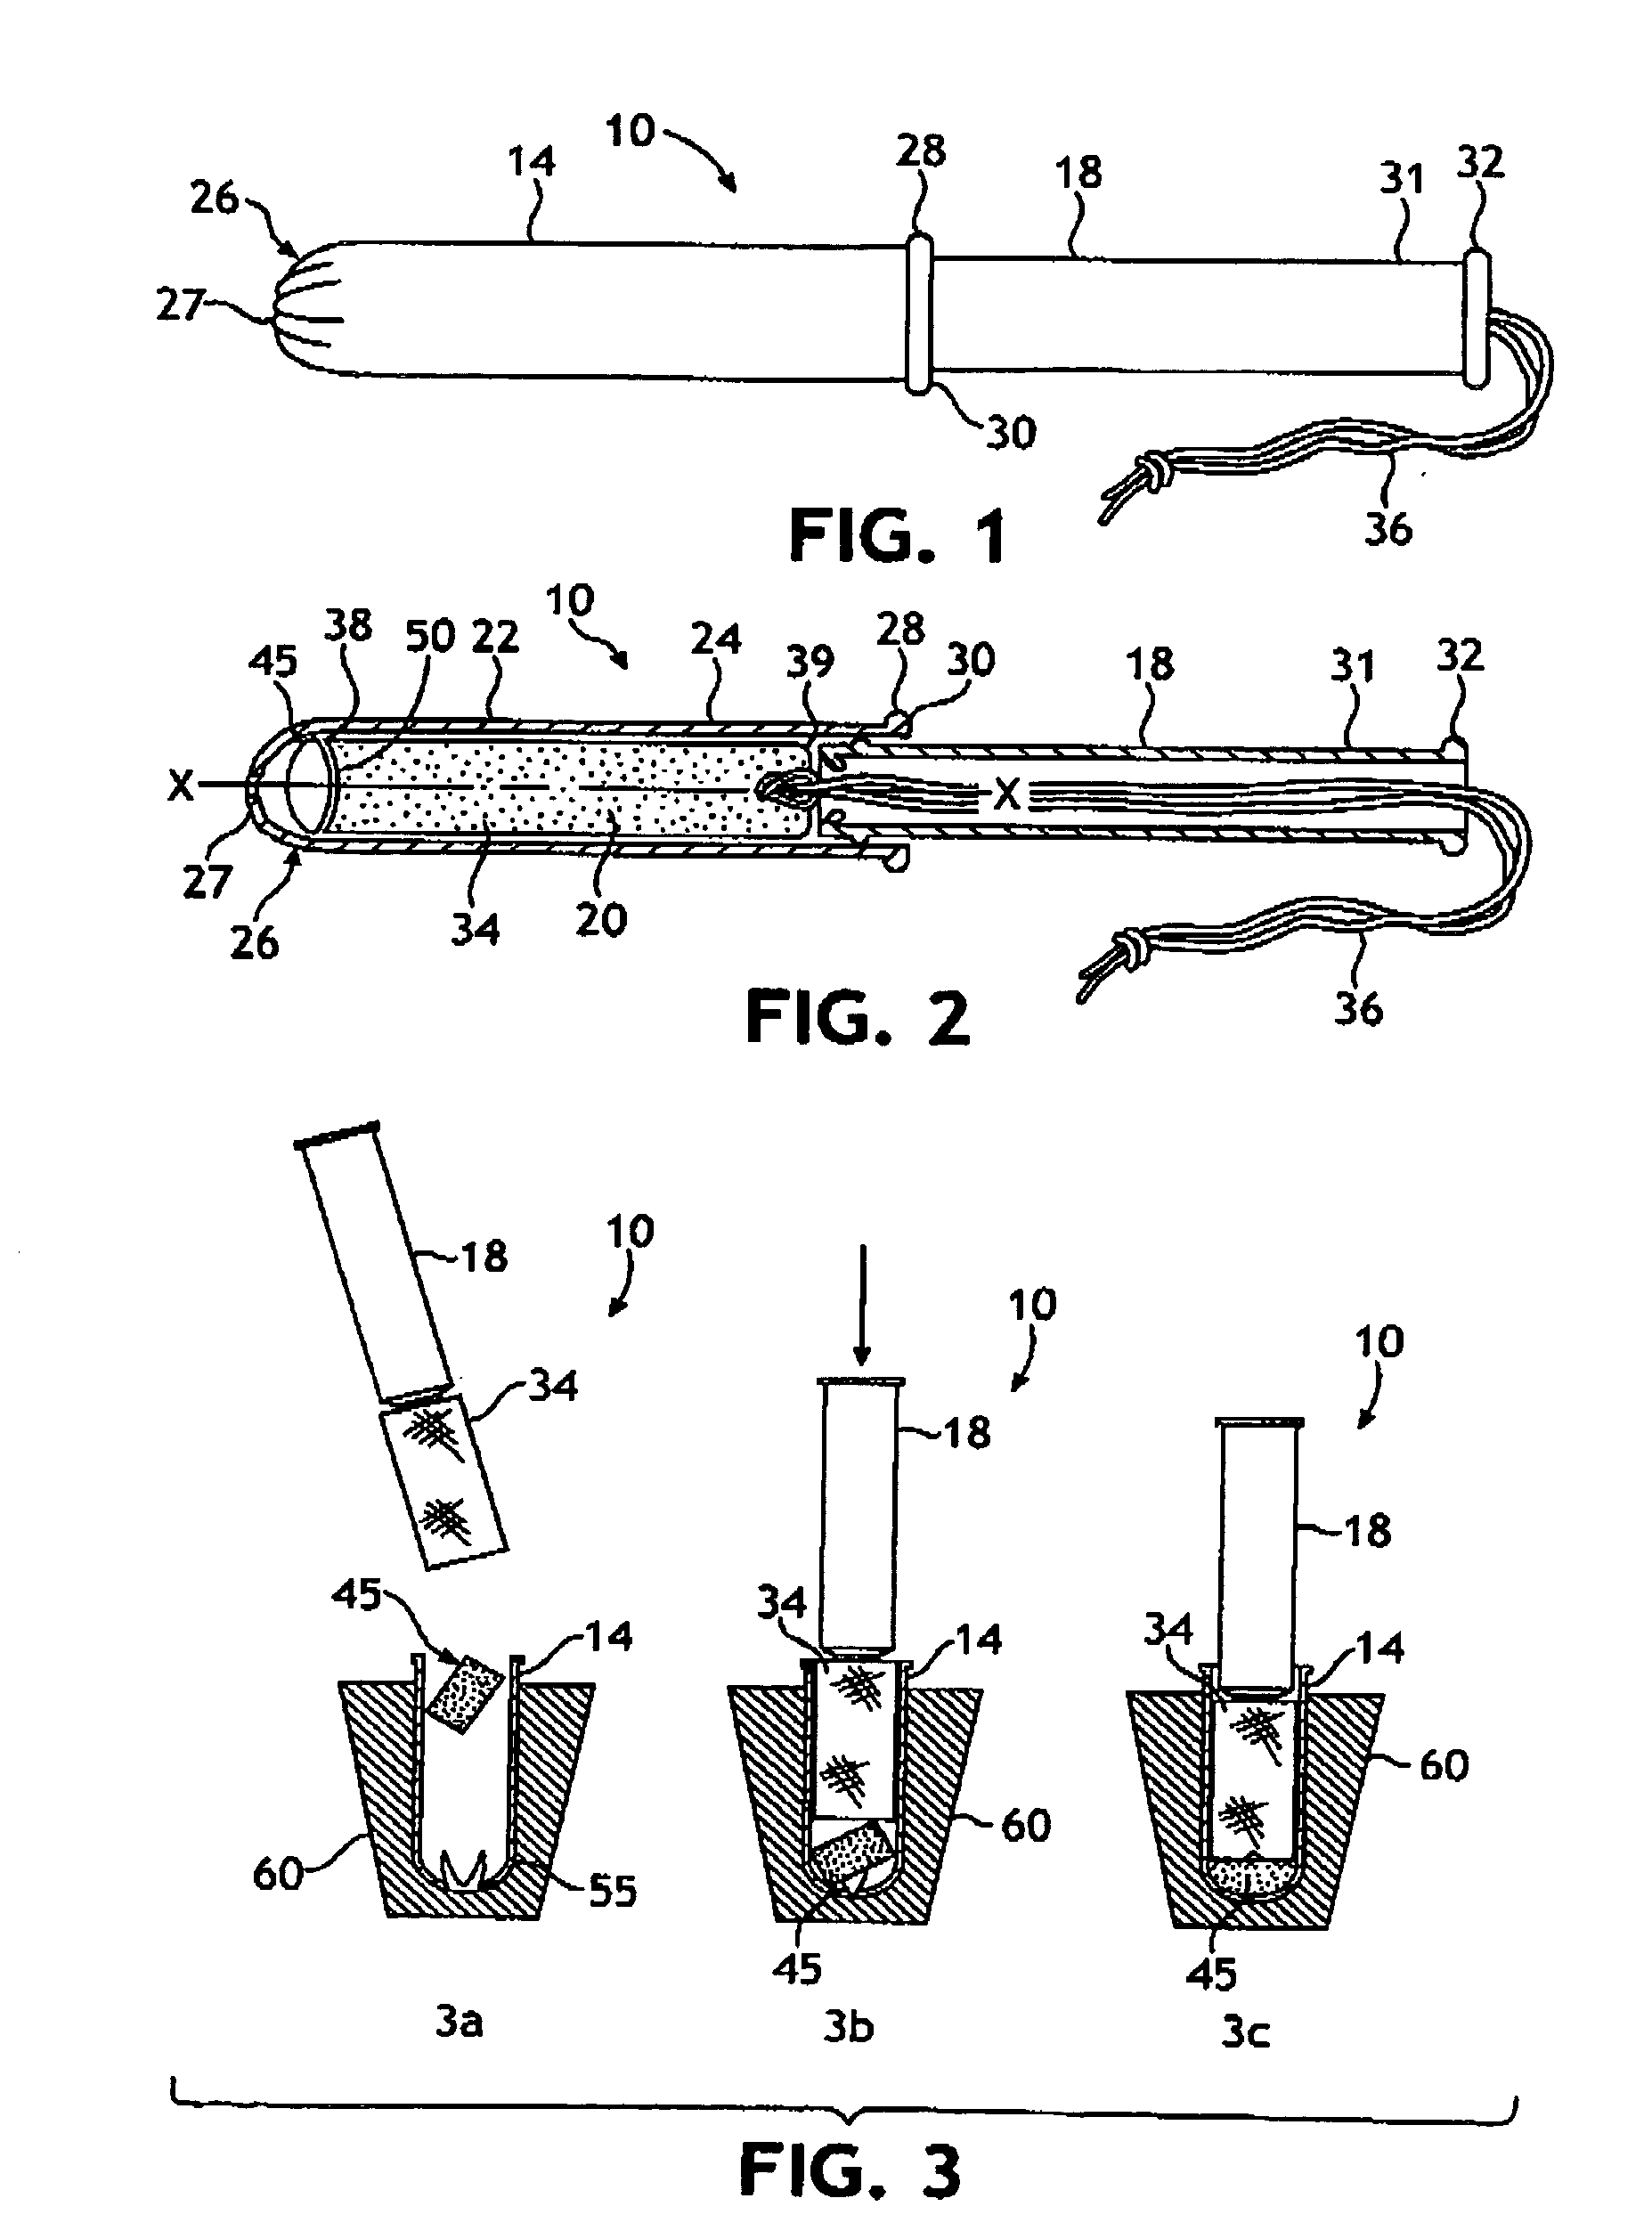 Methods of attaching a dosage form to a medicated tampon assembly